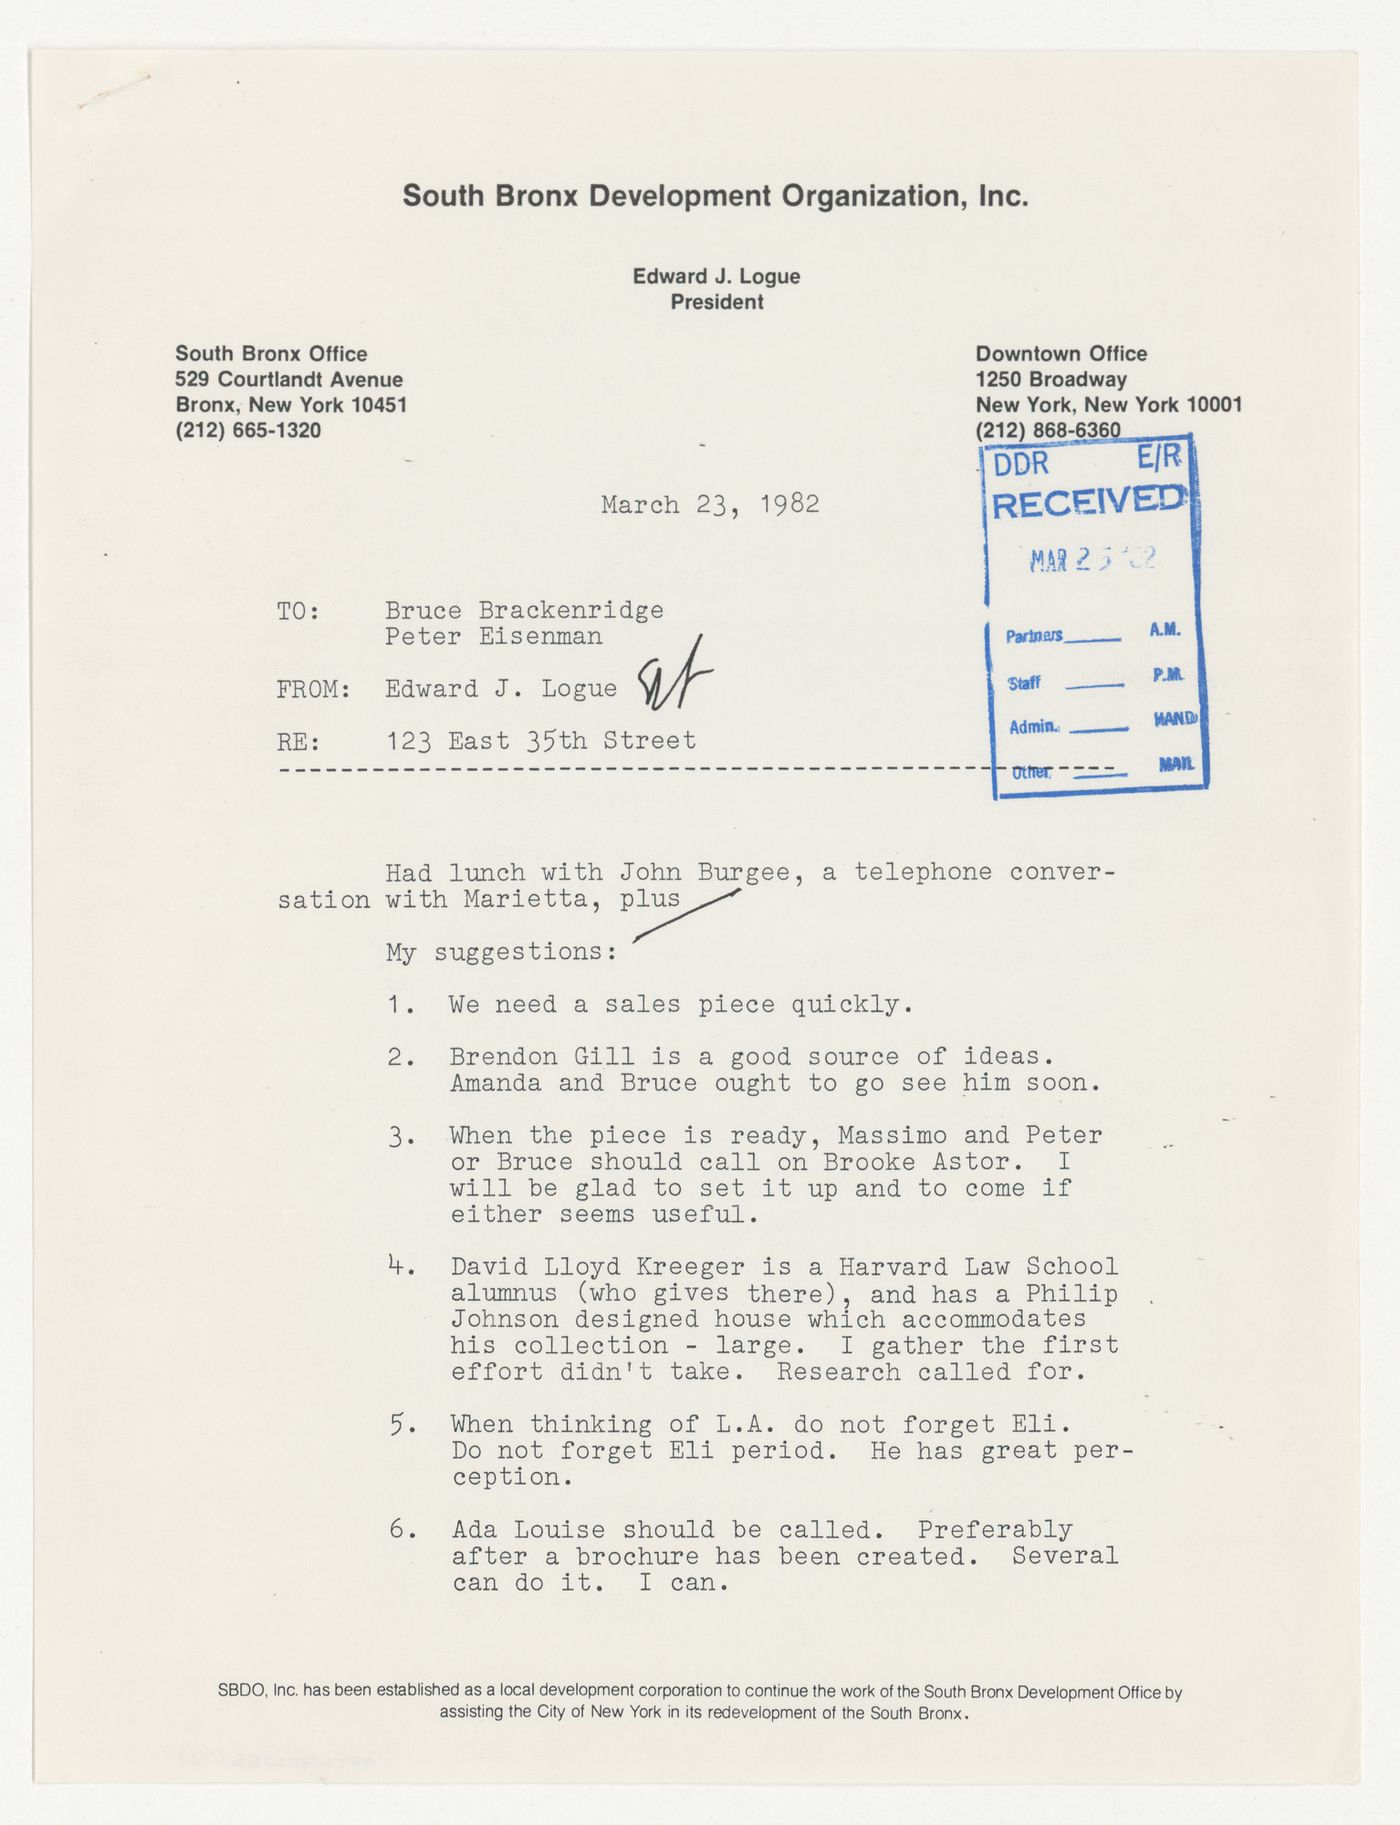 Letter from Edward J. Logue to Peter D. Eisenman and Bruce Brackenridge